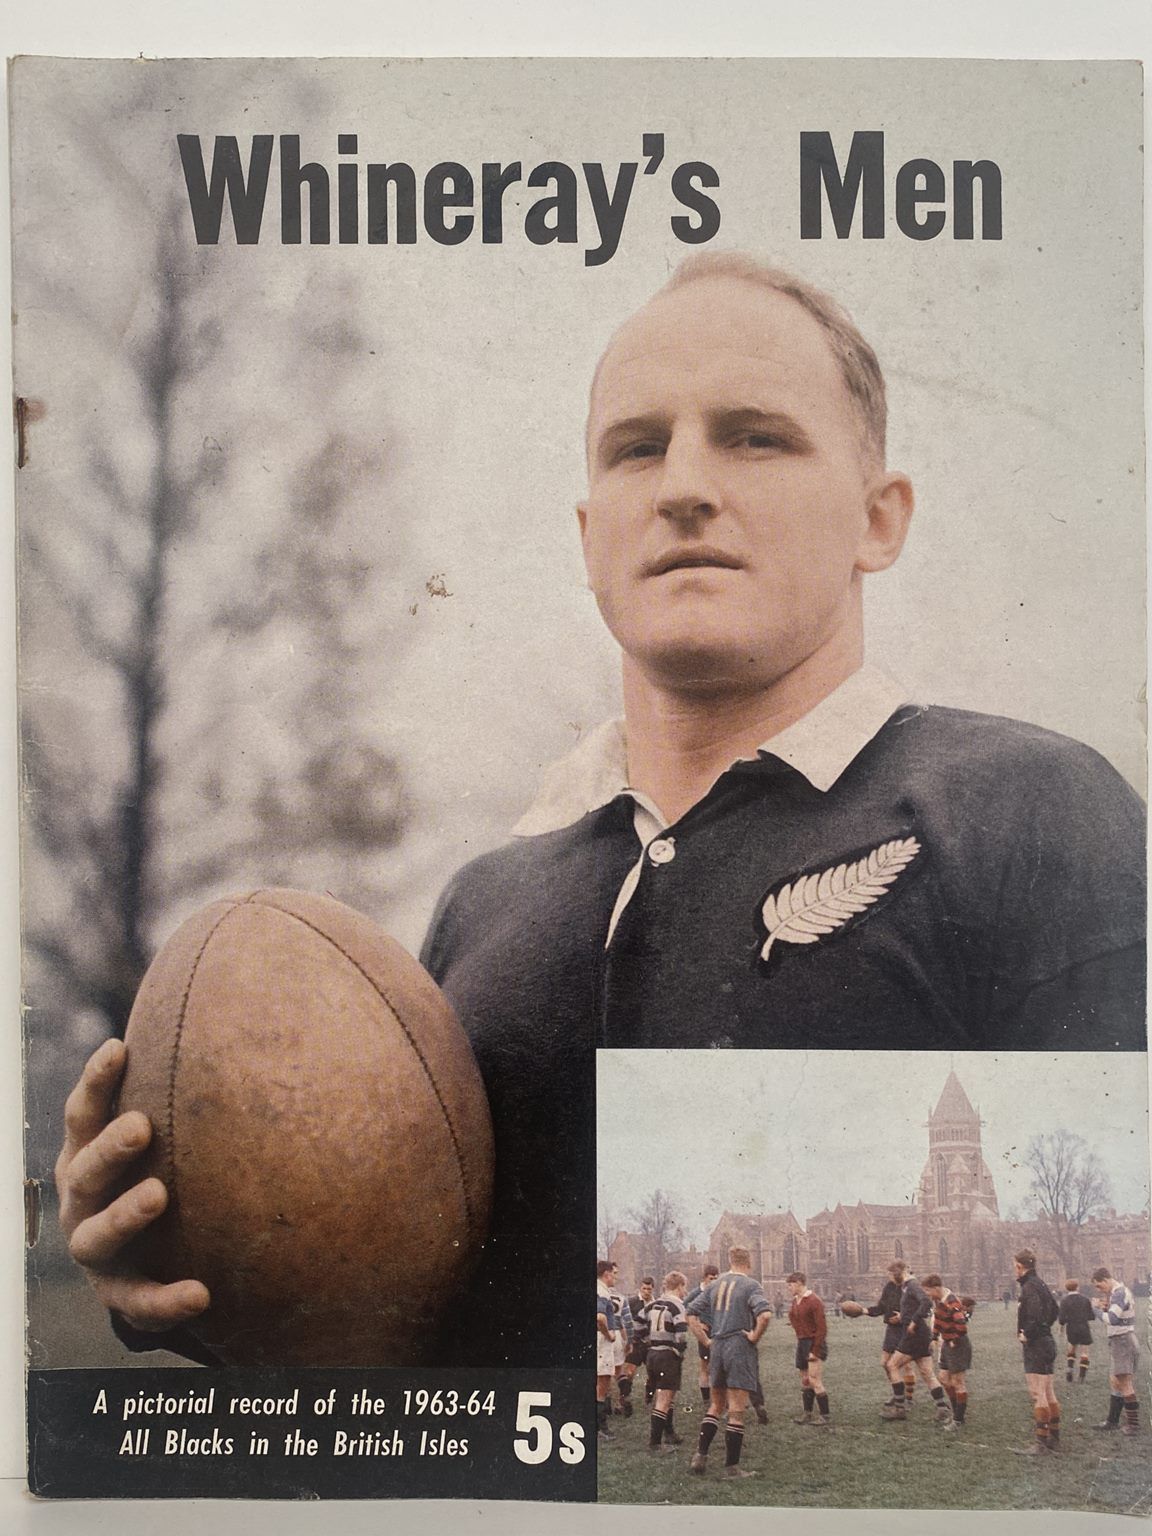 OLD MAGAZINE: Whineray's Men - A pictorial record of the 1963 / 64 All Blacks